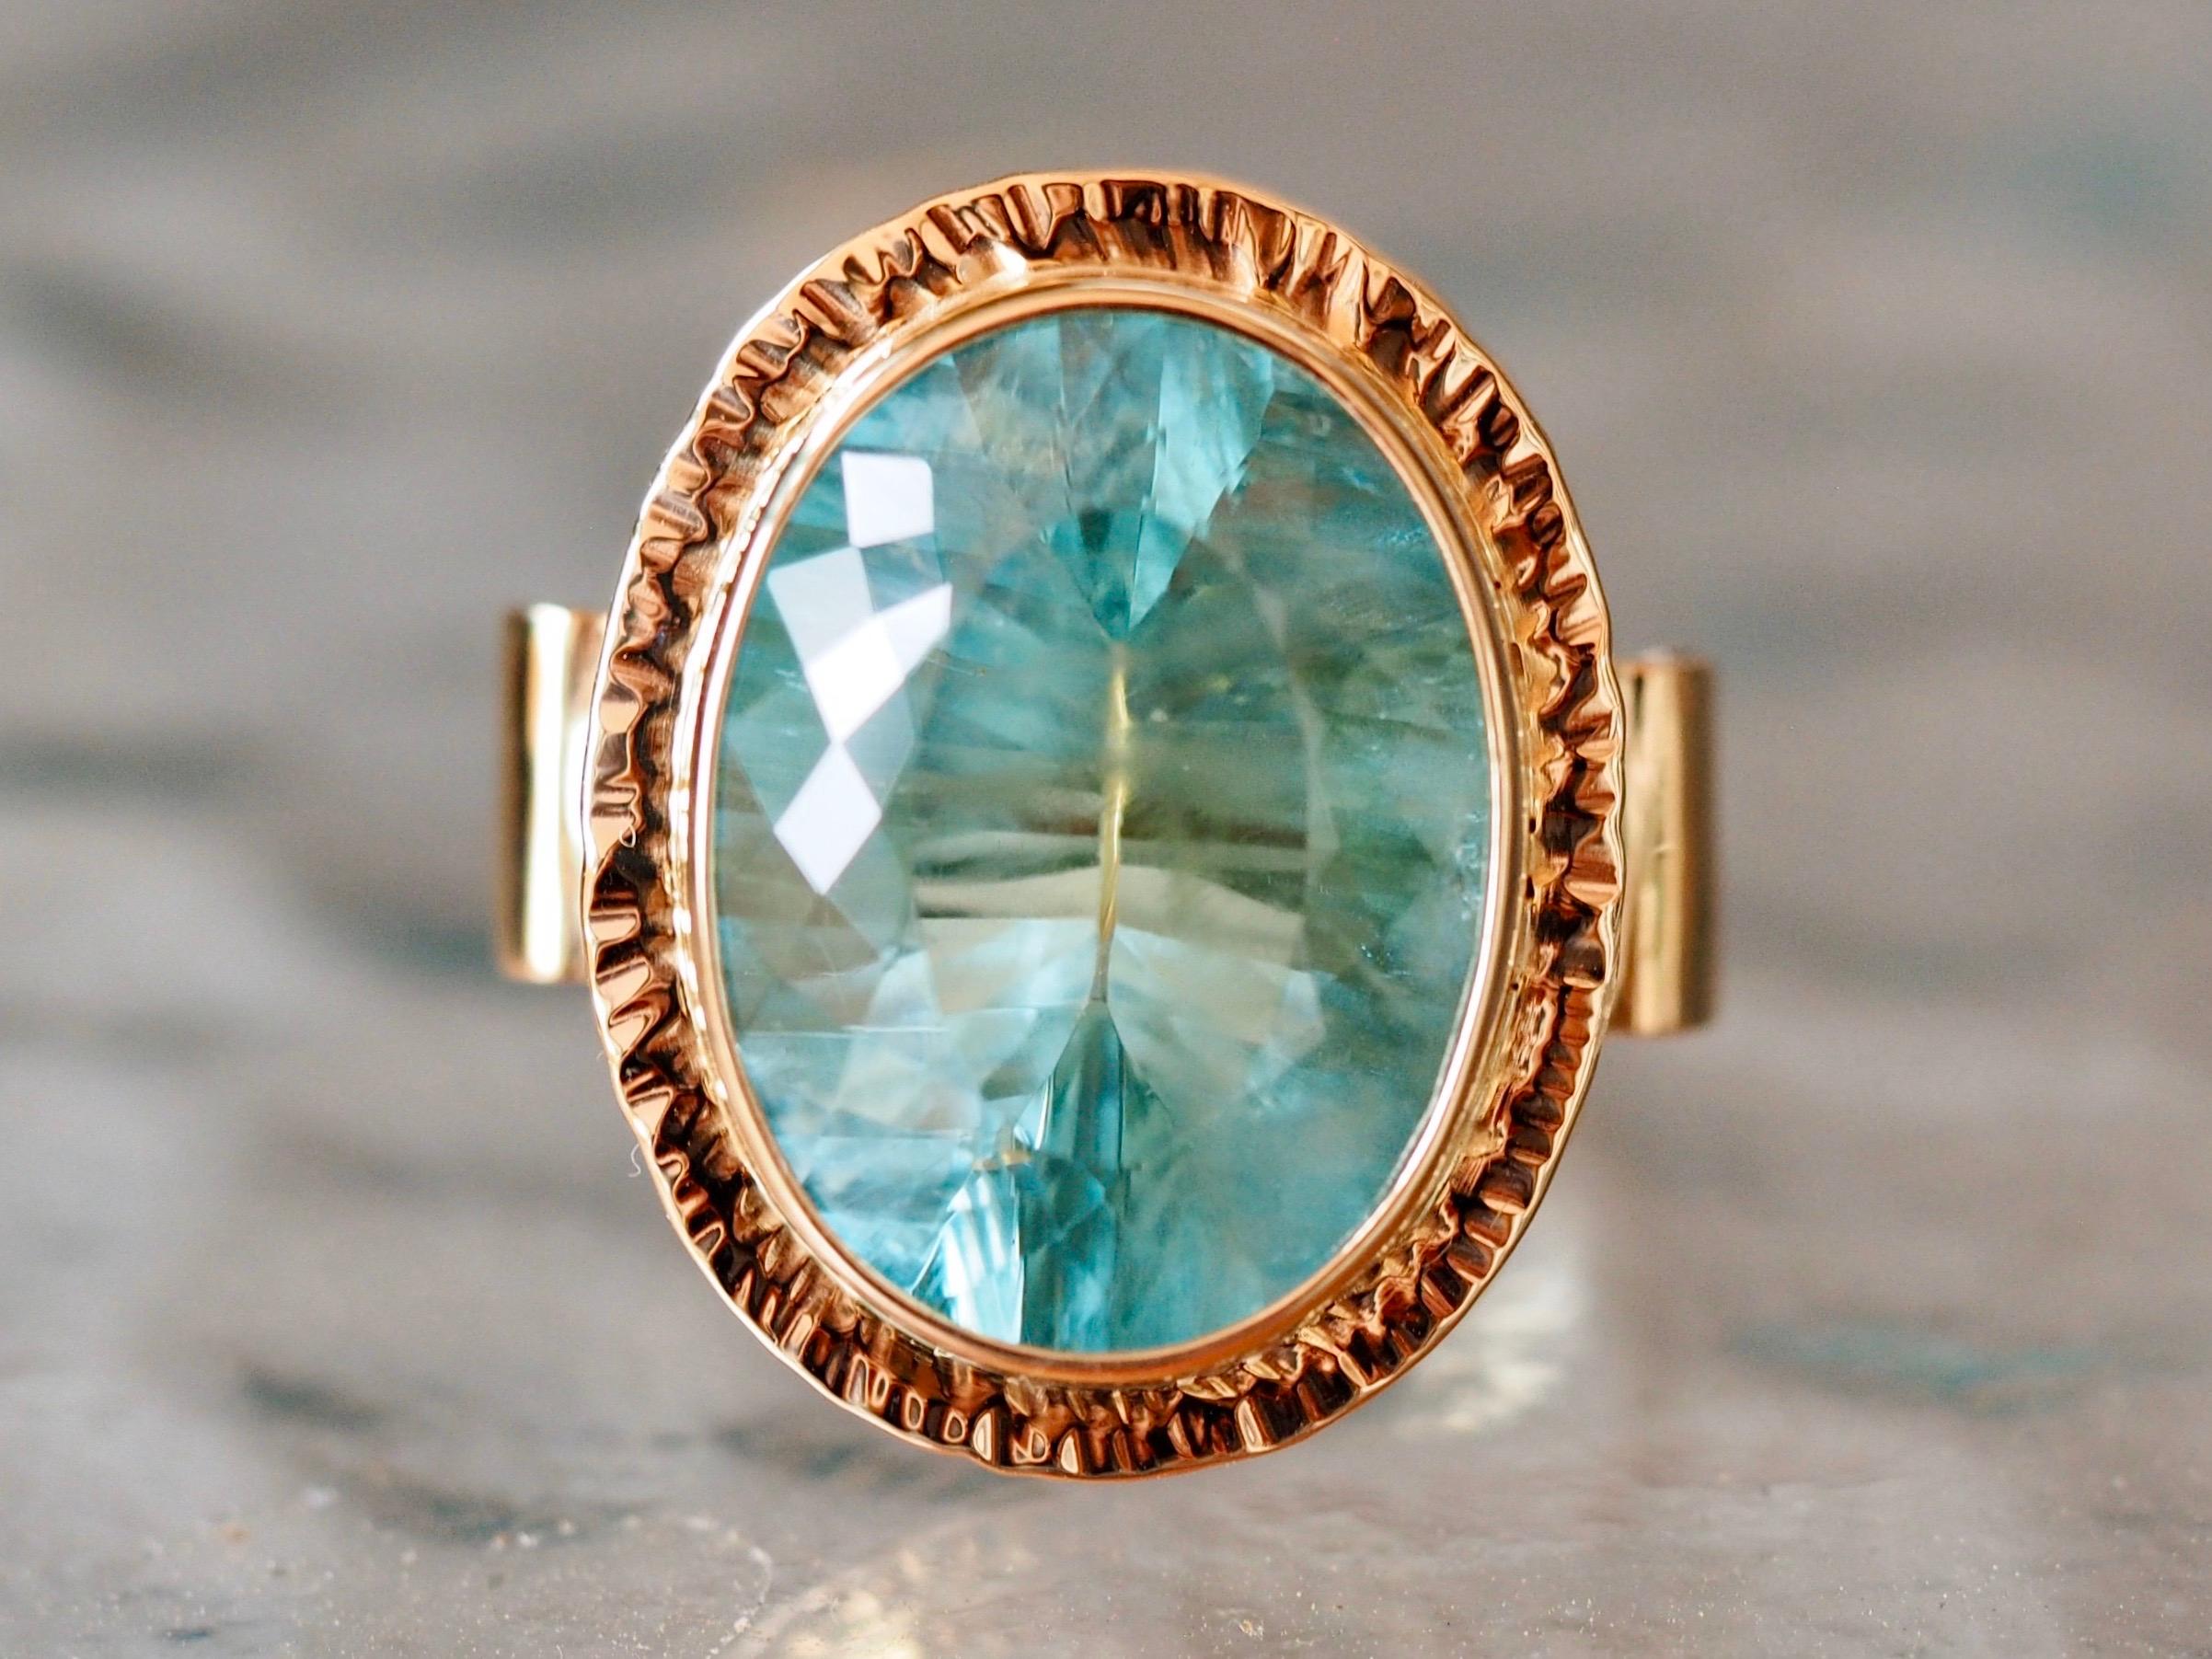 Designer Bakso statement ring holds a large faceted oval faceted blue tourmaline that measures 19 x 15 MM , weighing 20 carats. The light Caribbean blue center is bezel set in a 14-Karat yellow gold frame, it is detailed with a hammered golden